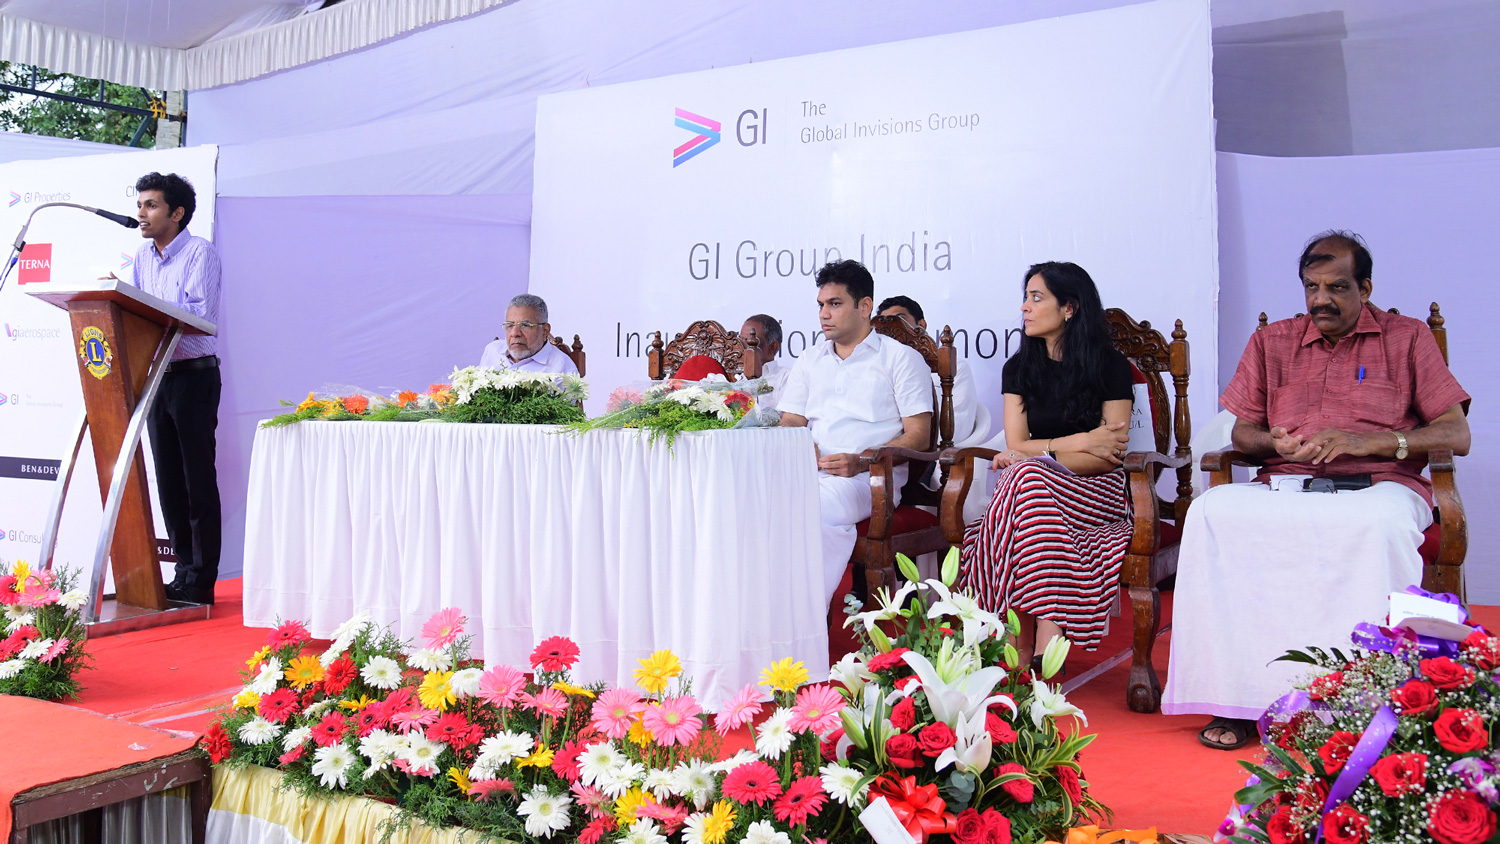 GI Group India office inaugurated by M.L.A Hibi Eden in Kochi